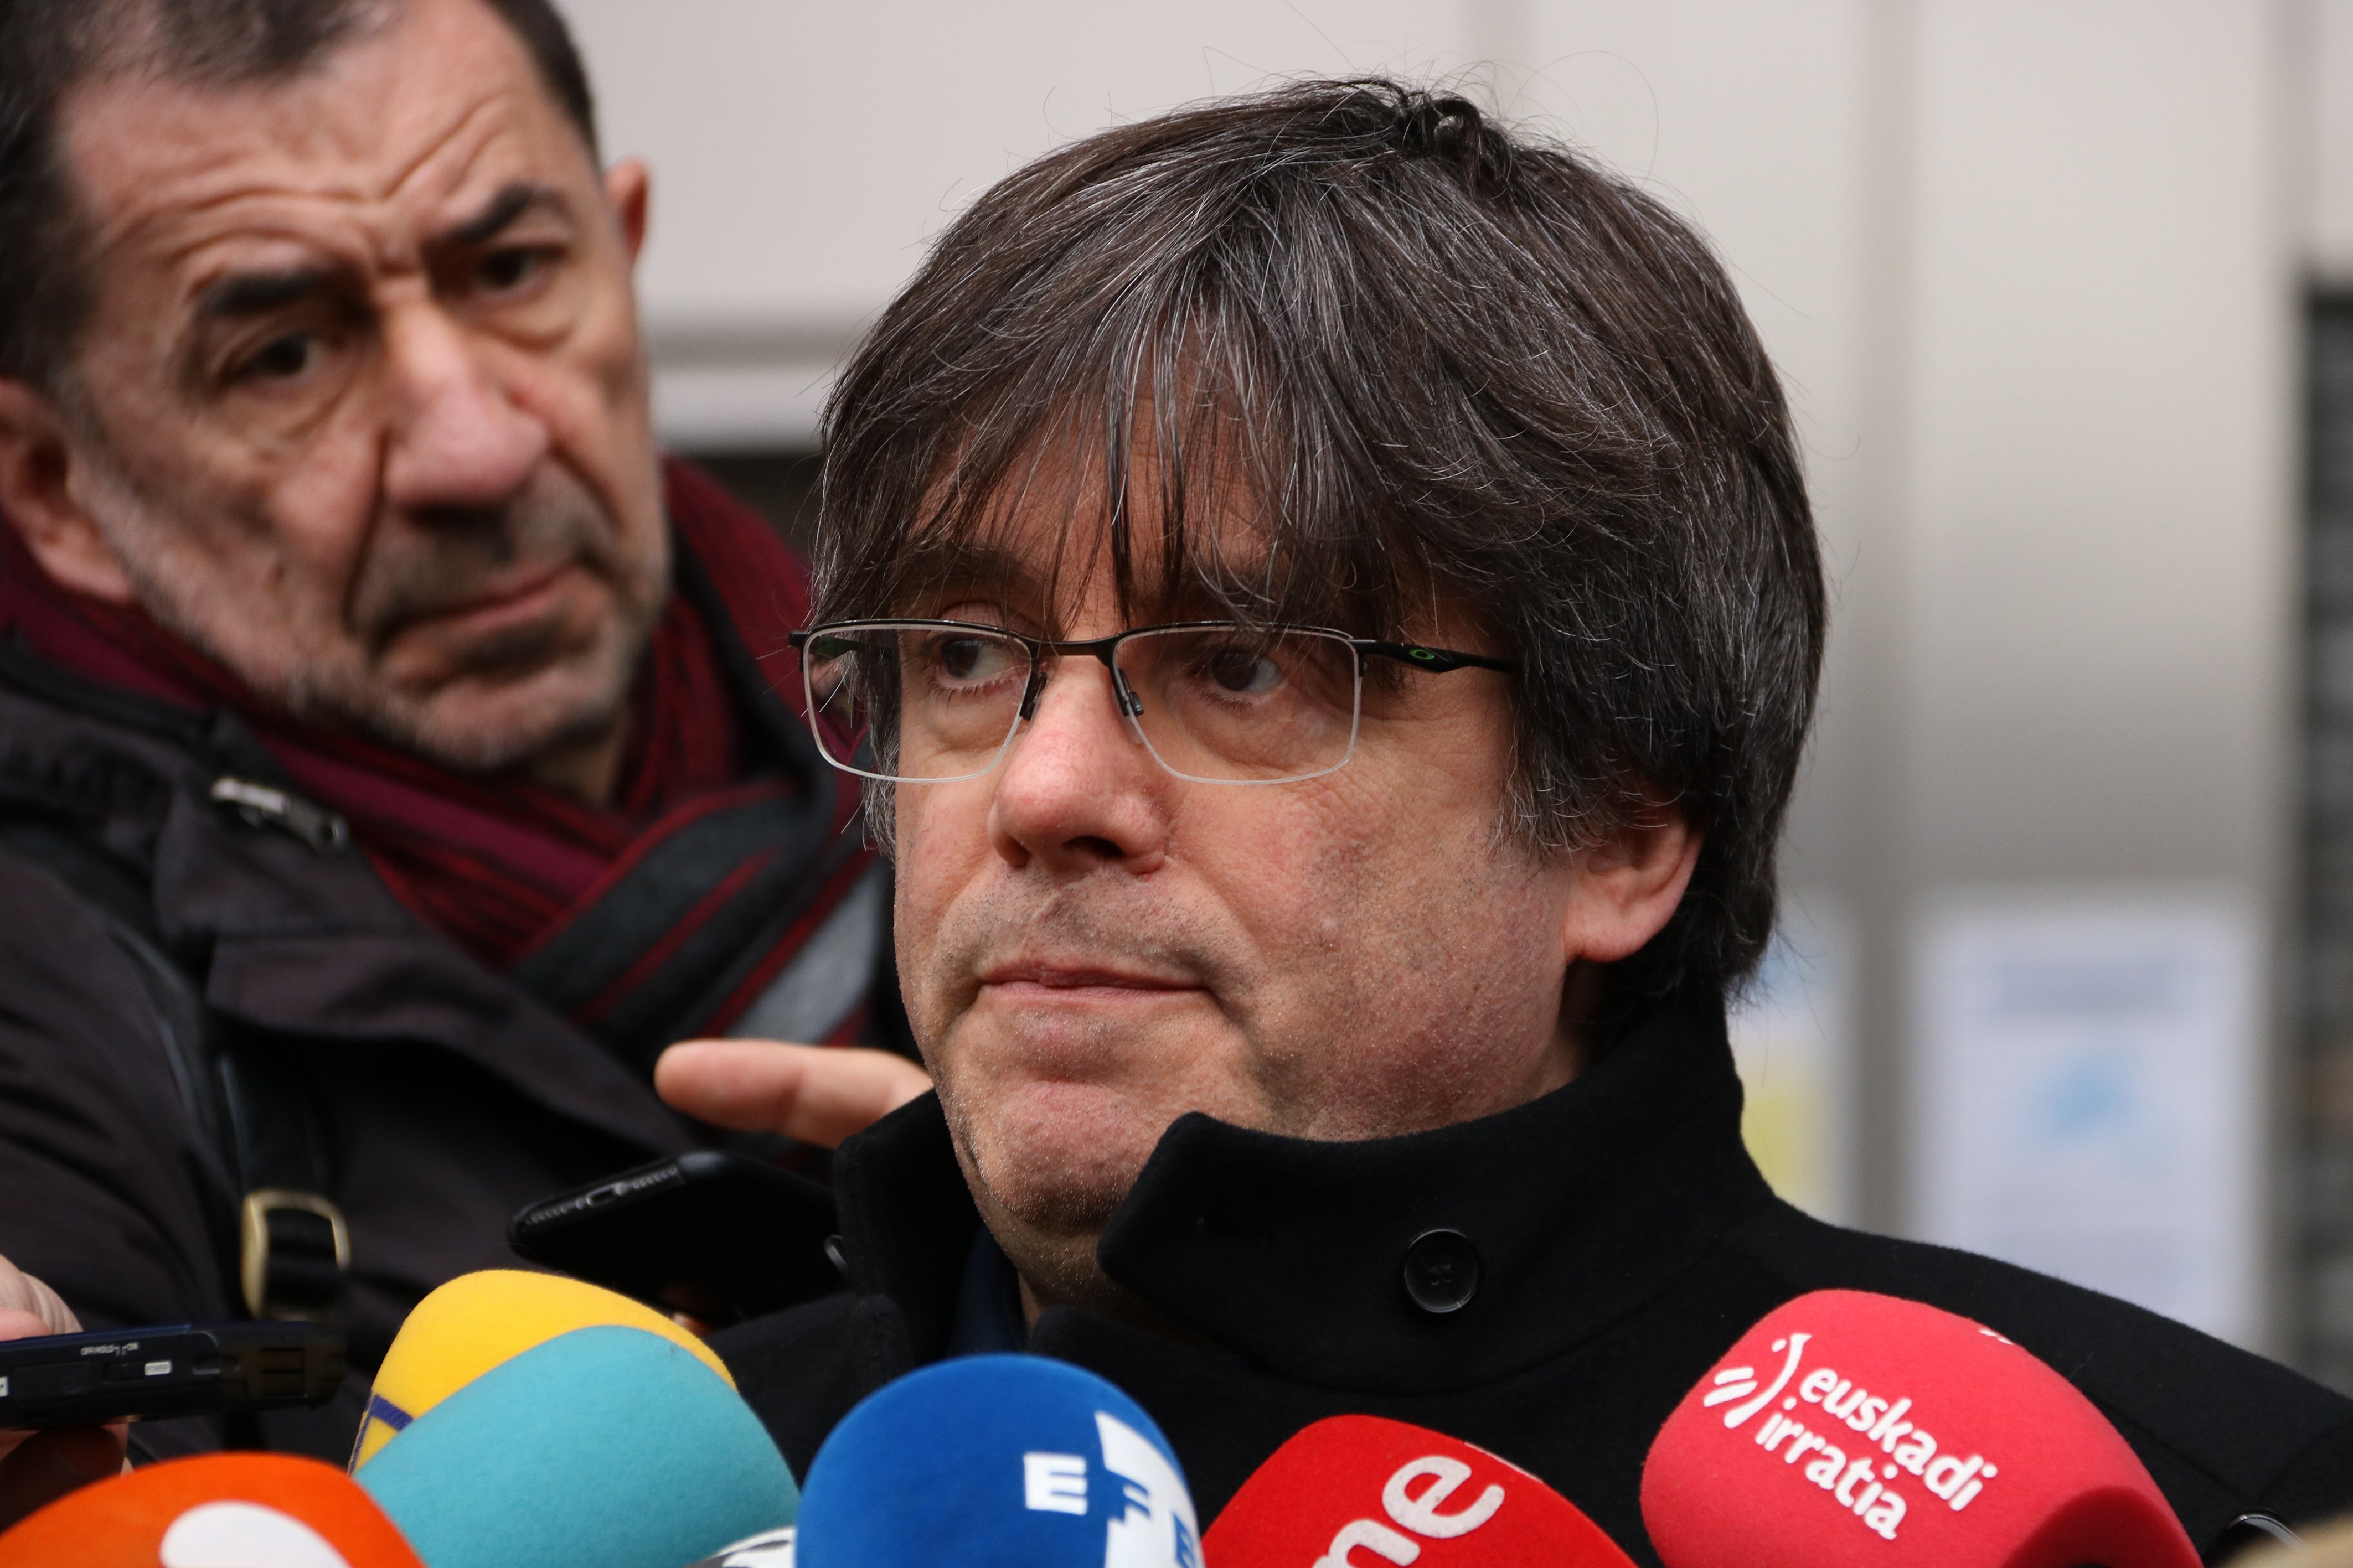 Puigdemont: "I want to hear Pedro Sánchez agree to a new independence referendum"